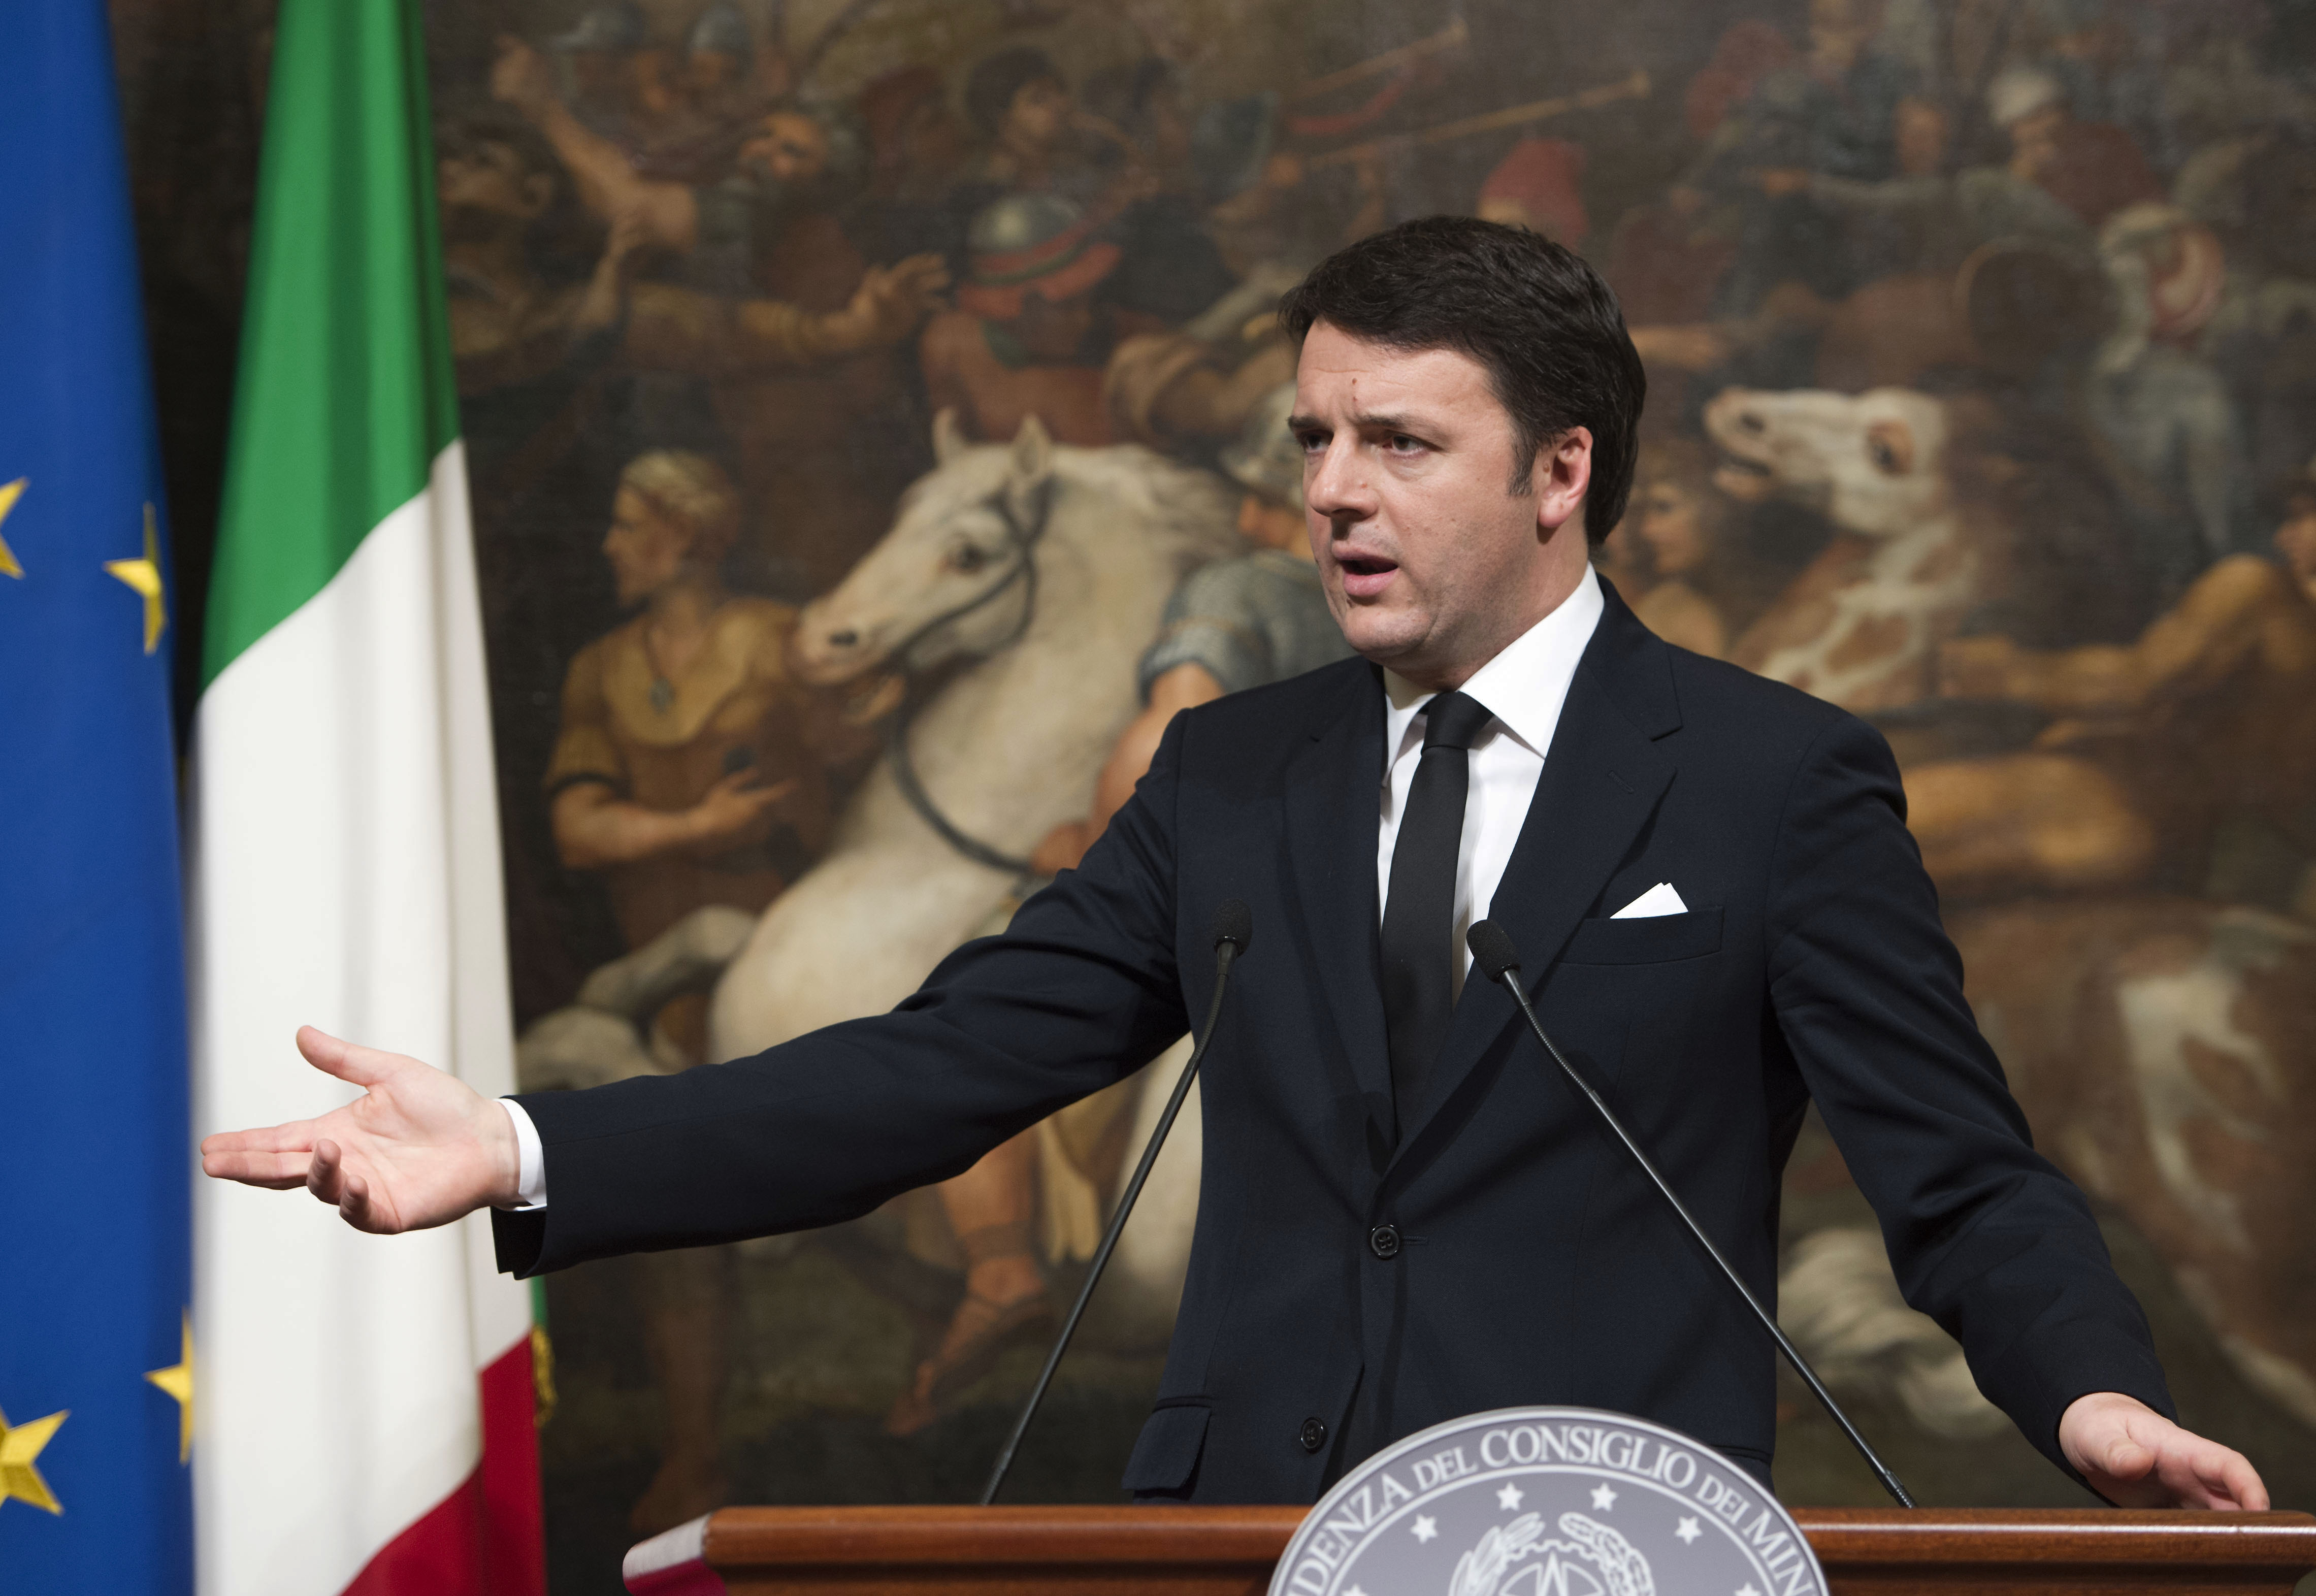 Italian PM: Supporters of ‘stupid’ boycotts betray their own future